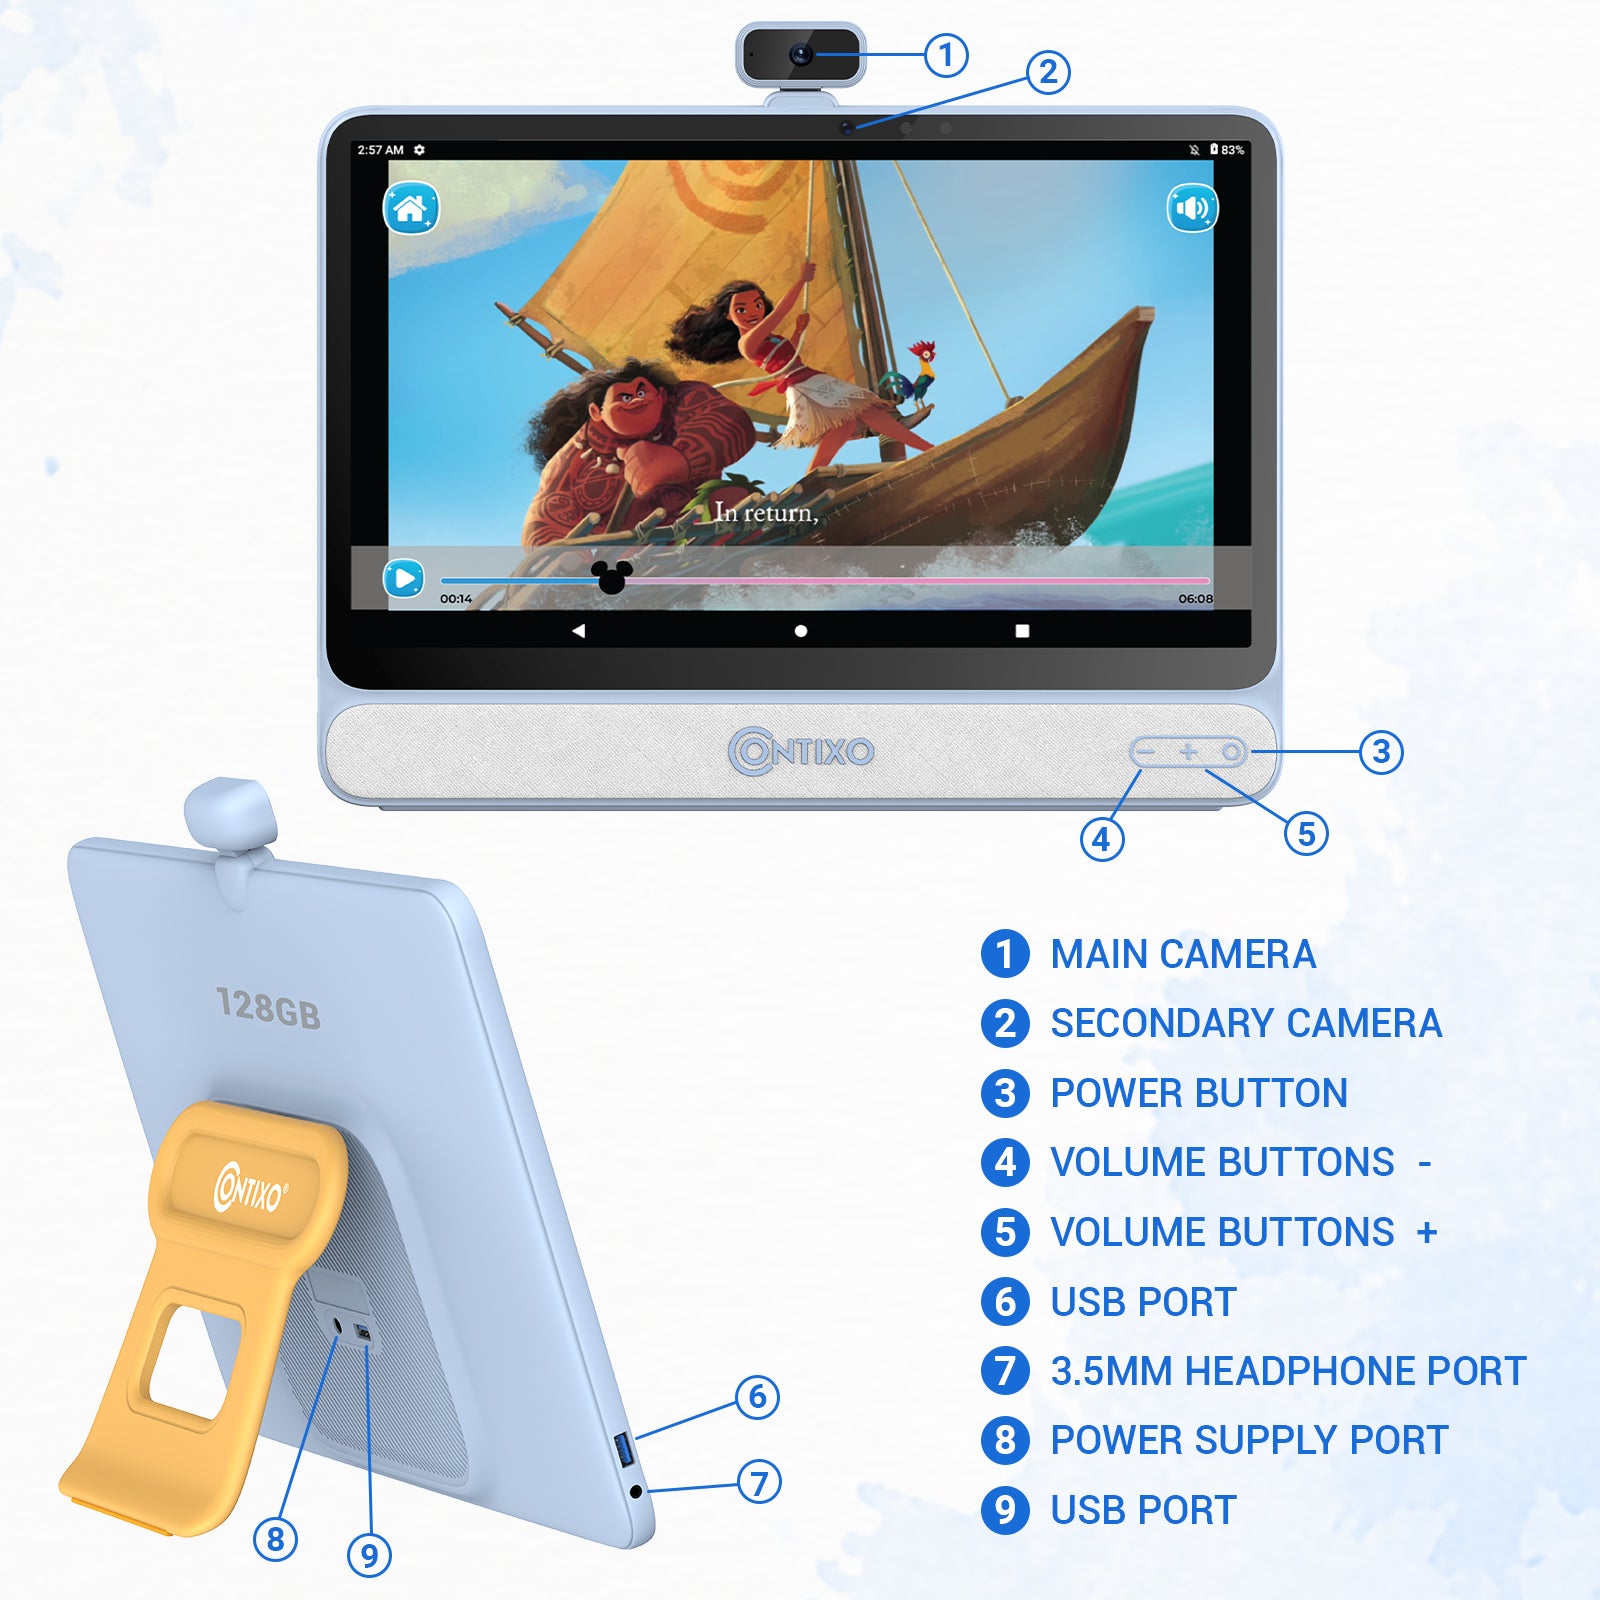 Contixo A3 15.6" Educational Android Tablet With 13MP Camera